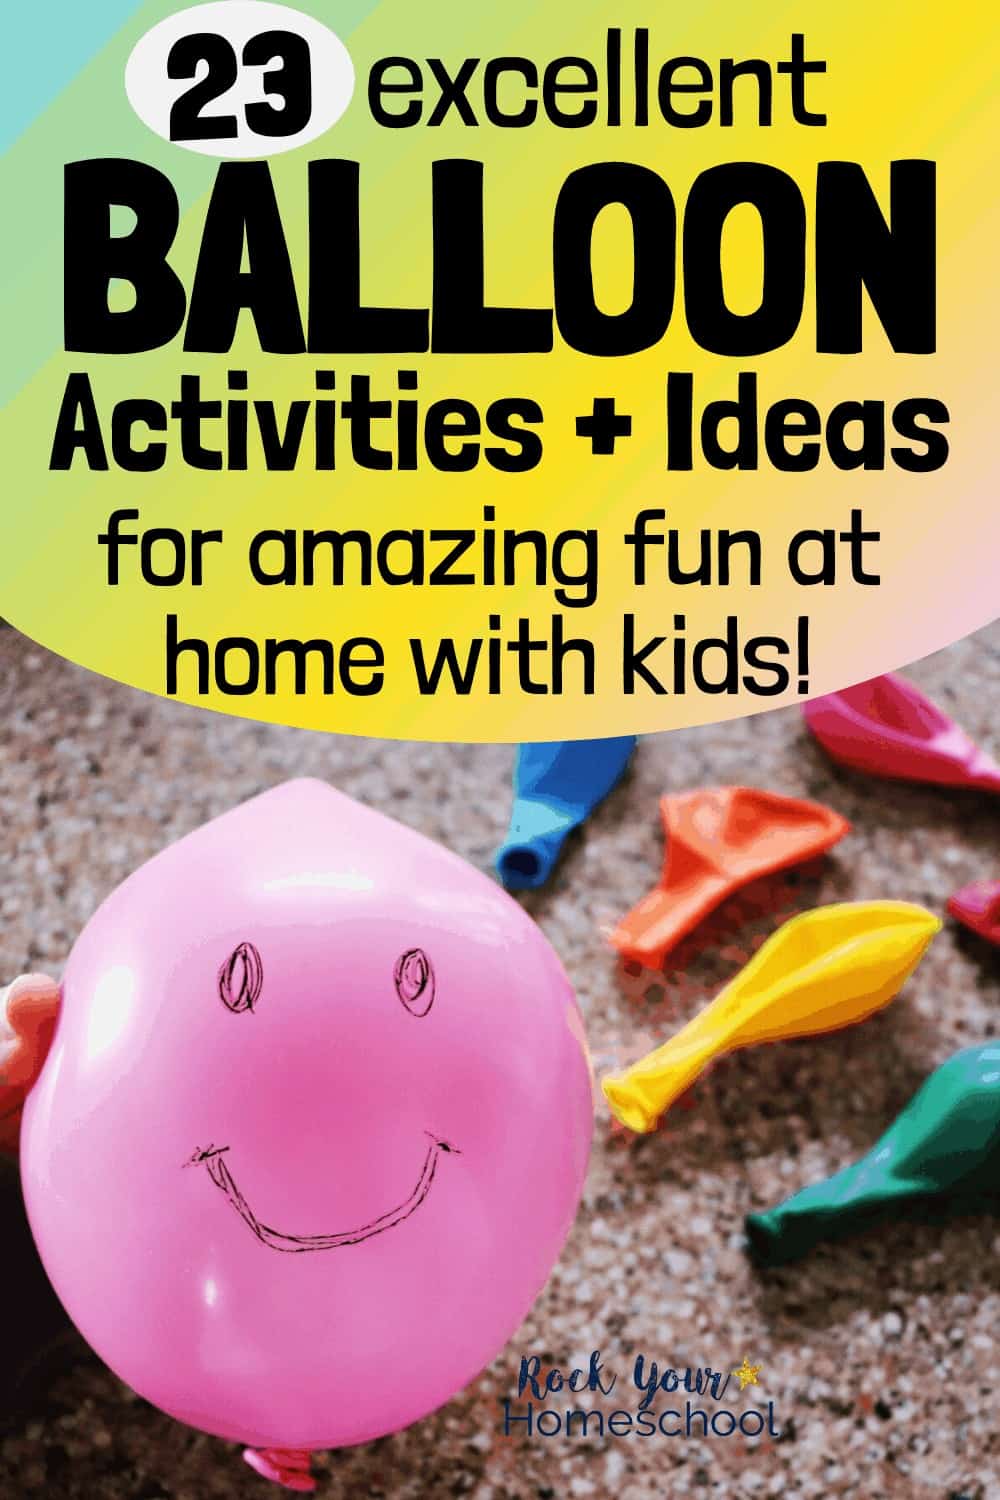 23 Excellent Balloon Activities & Ideas for Fun at Home